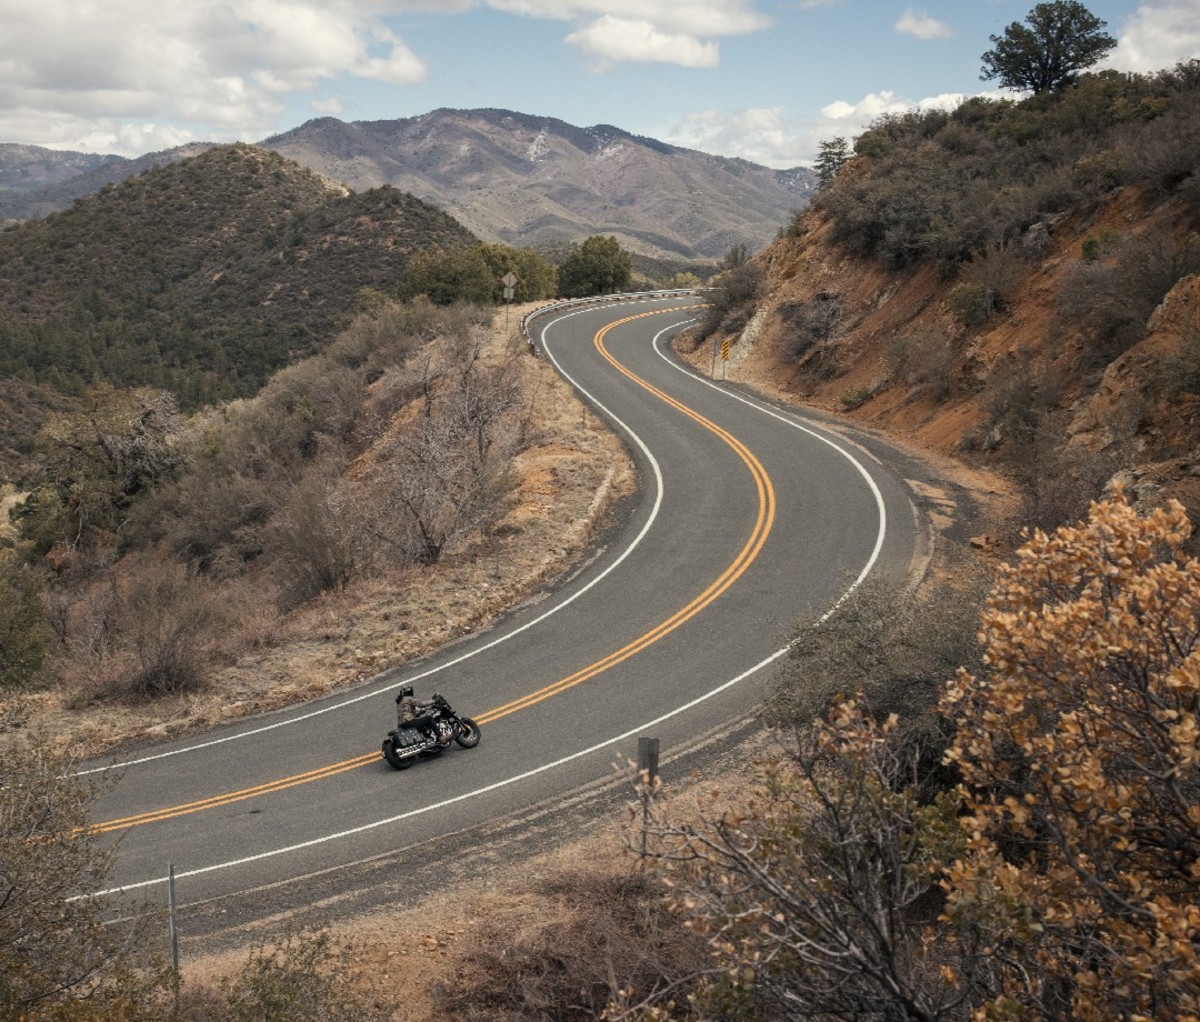 Long shot of a rider on an Indian Chief motorcycle riding along a curved mountain road